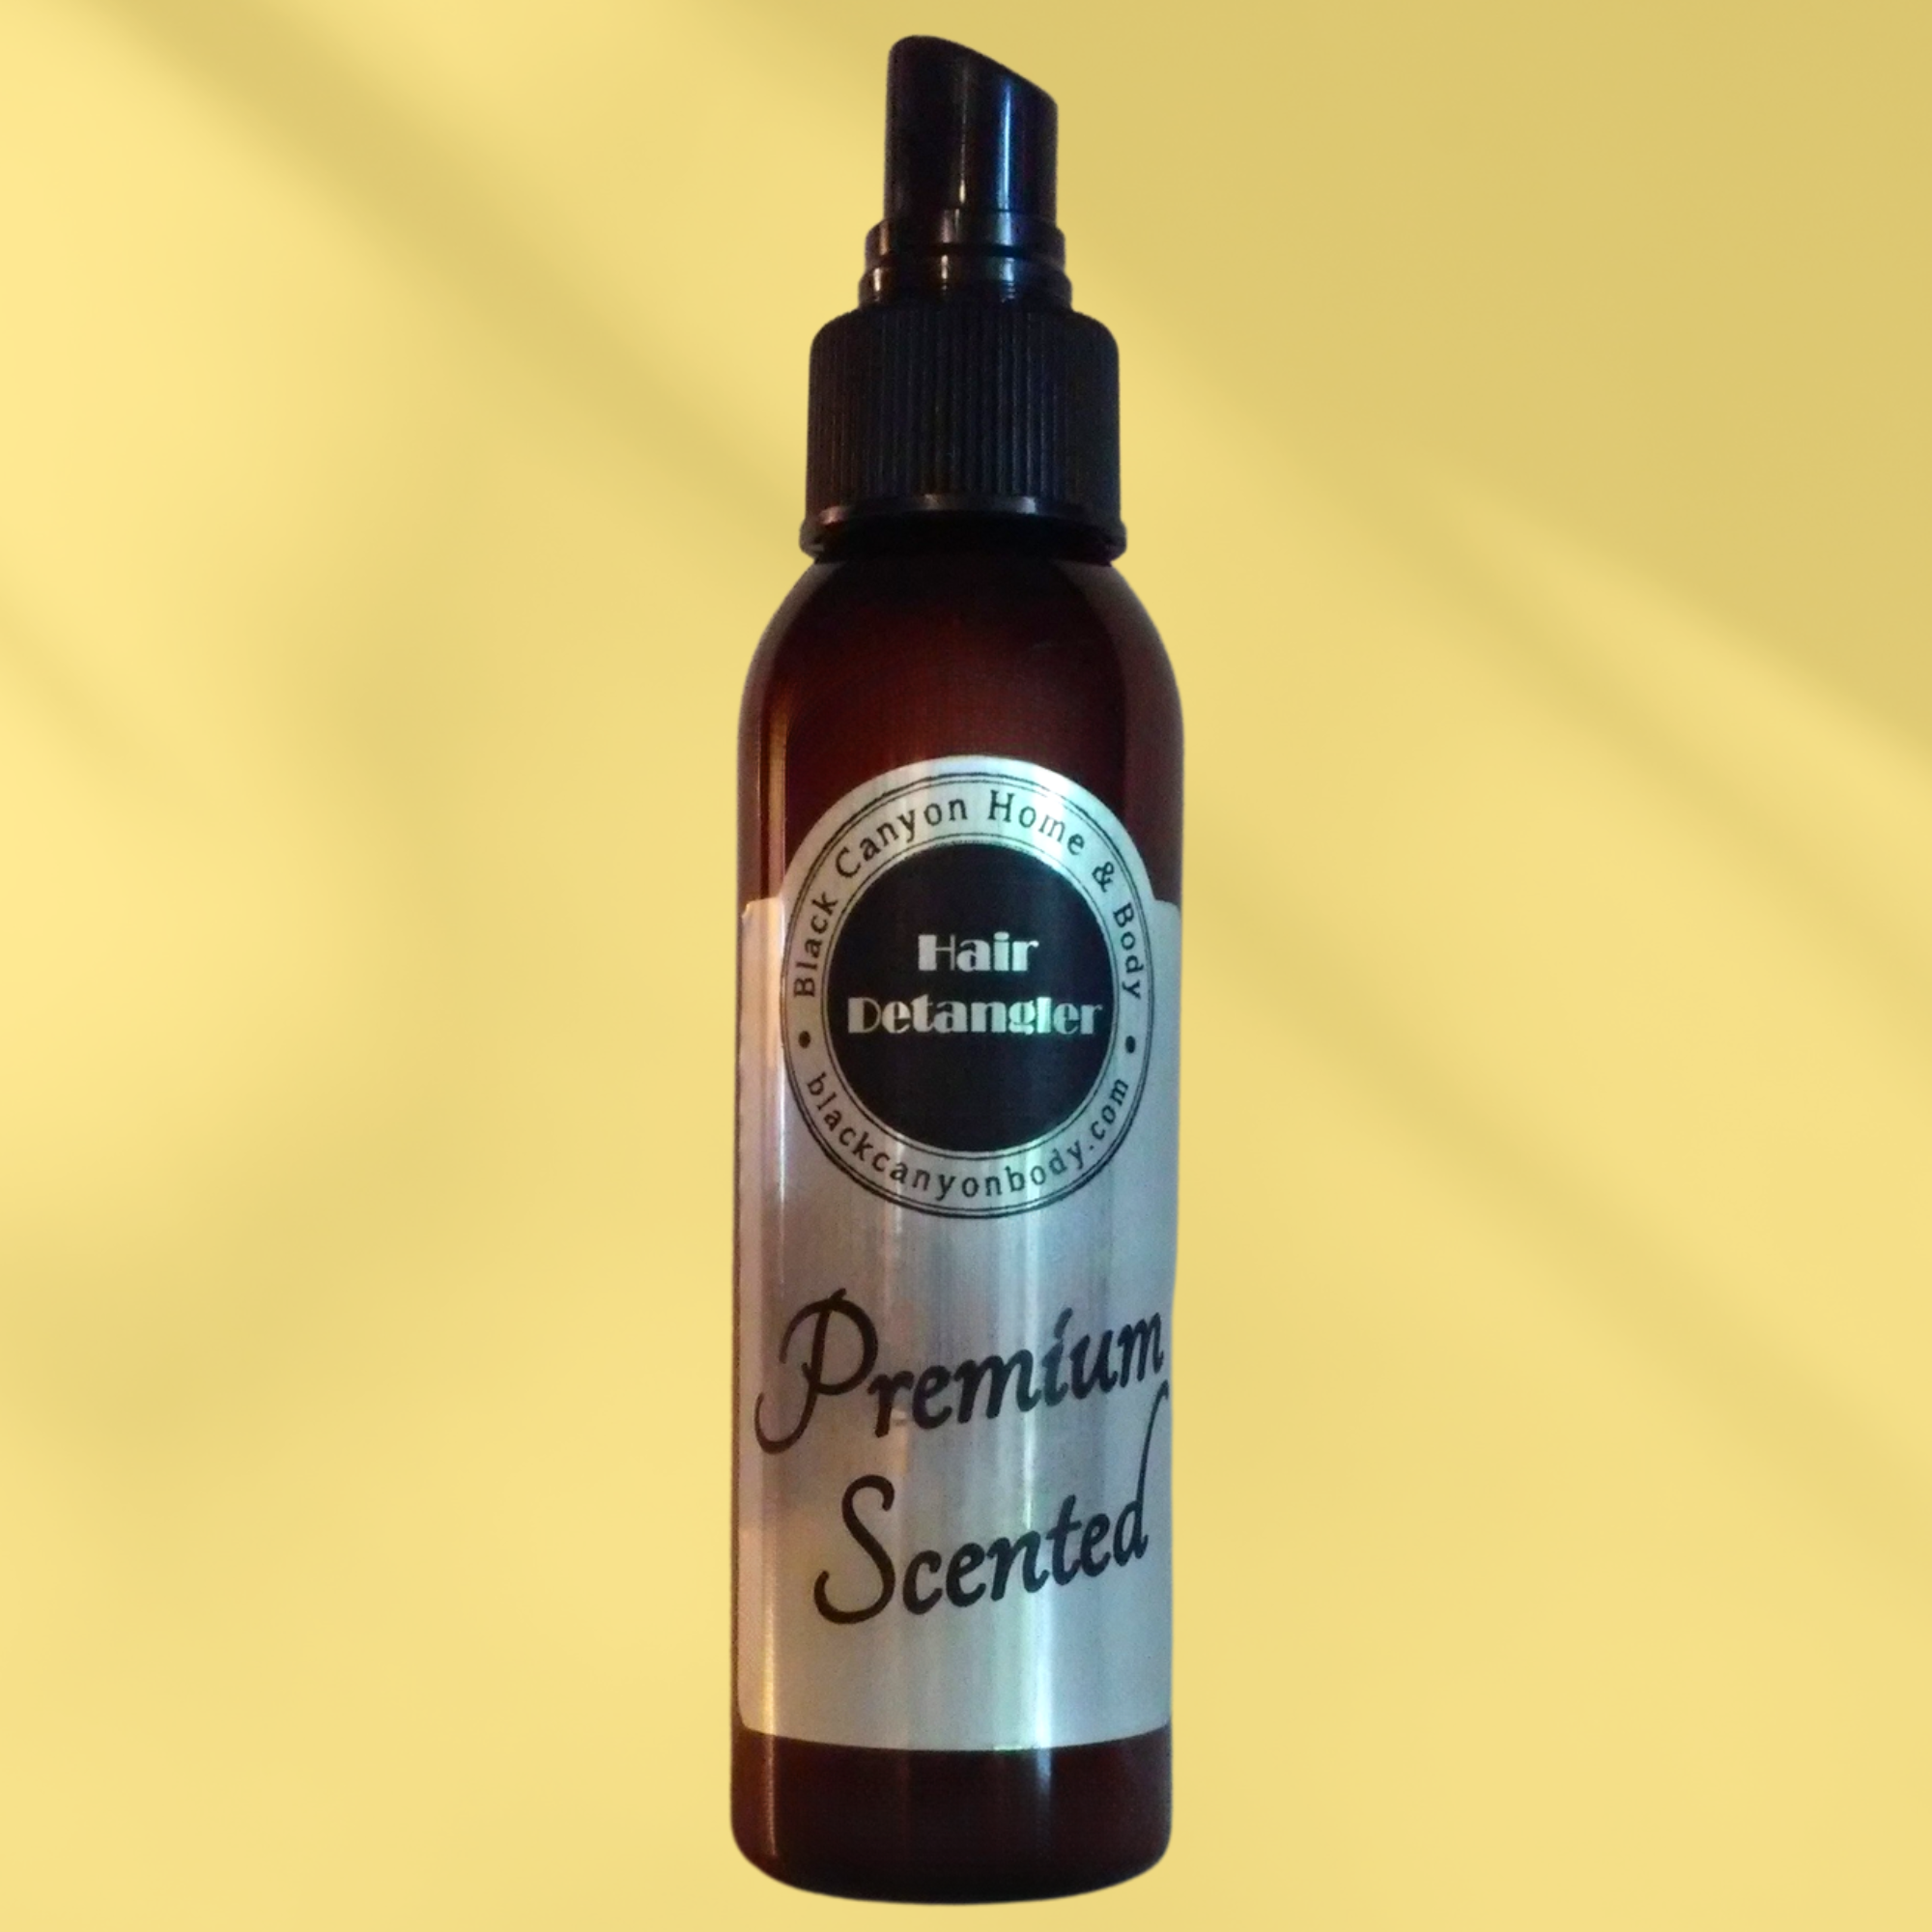 Black Canyon Bergamot & Asiatic Lily Scented Hair Detangler Spray with Olive Oil